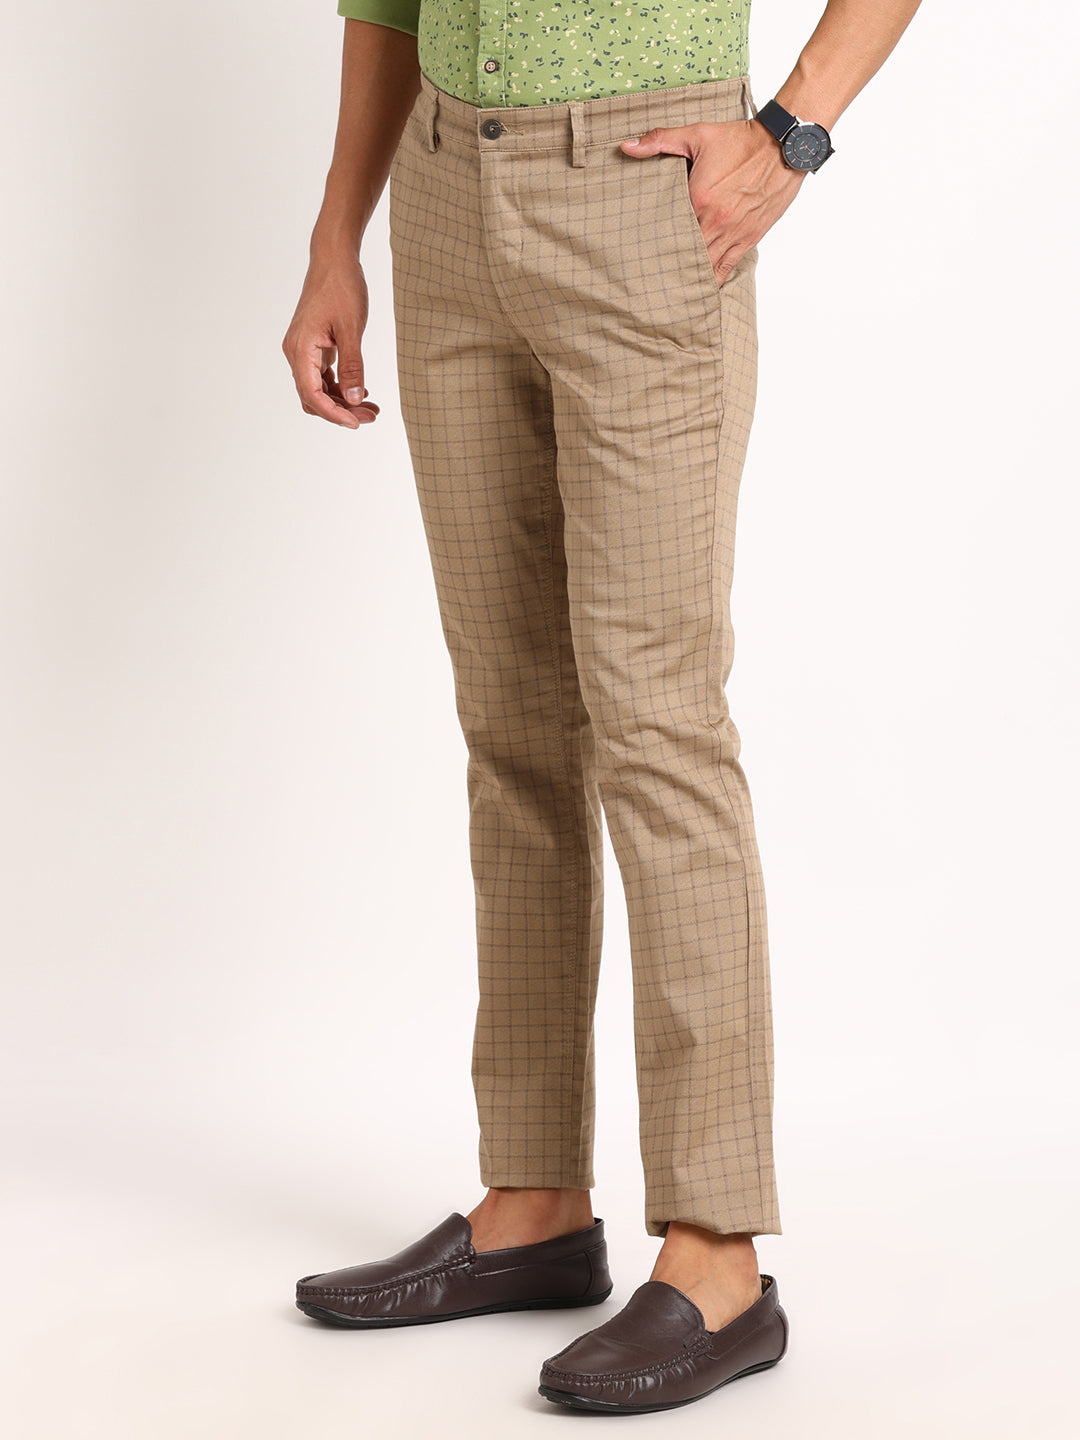 Cotton Stretch Khaki Checkered Narrow Fit Flat Front Casual Trouser